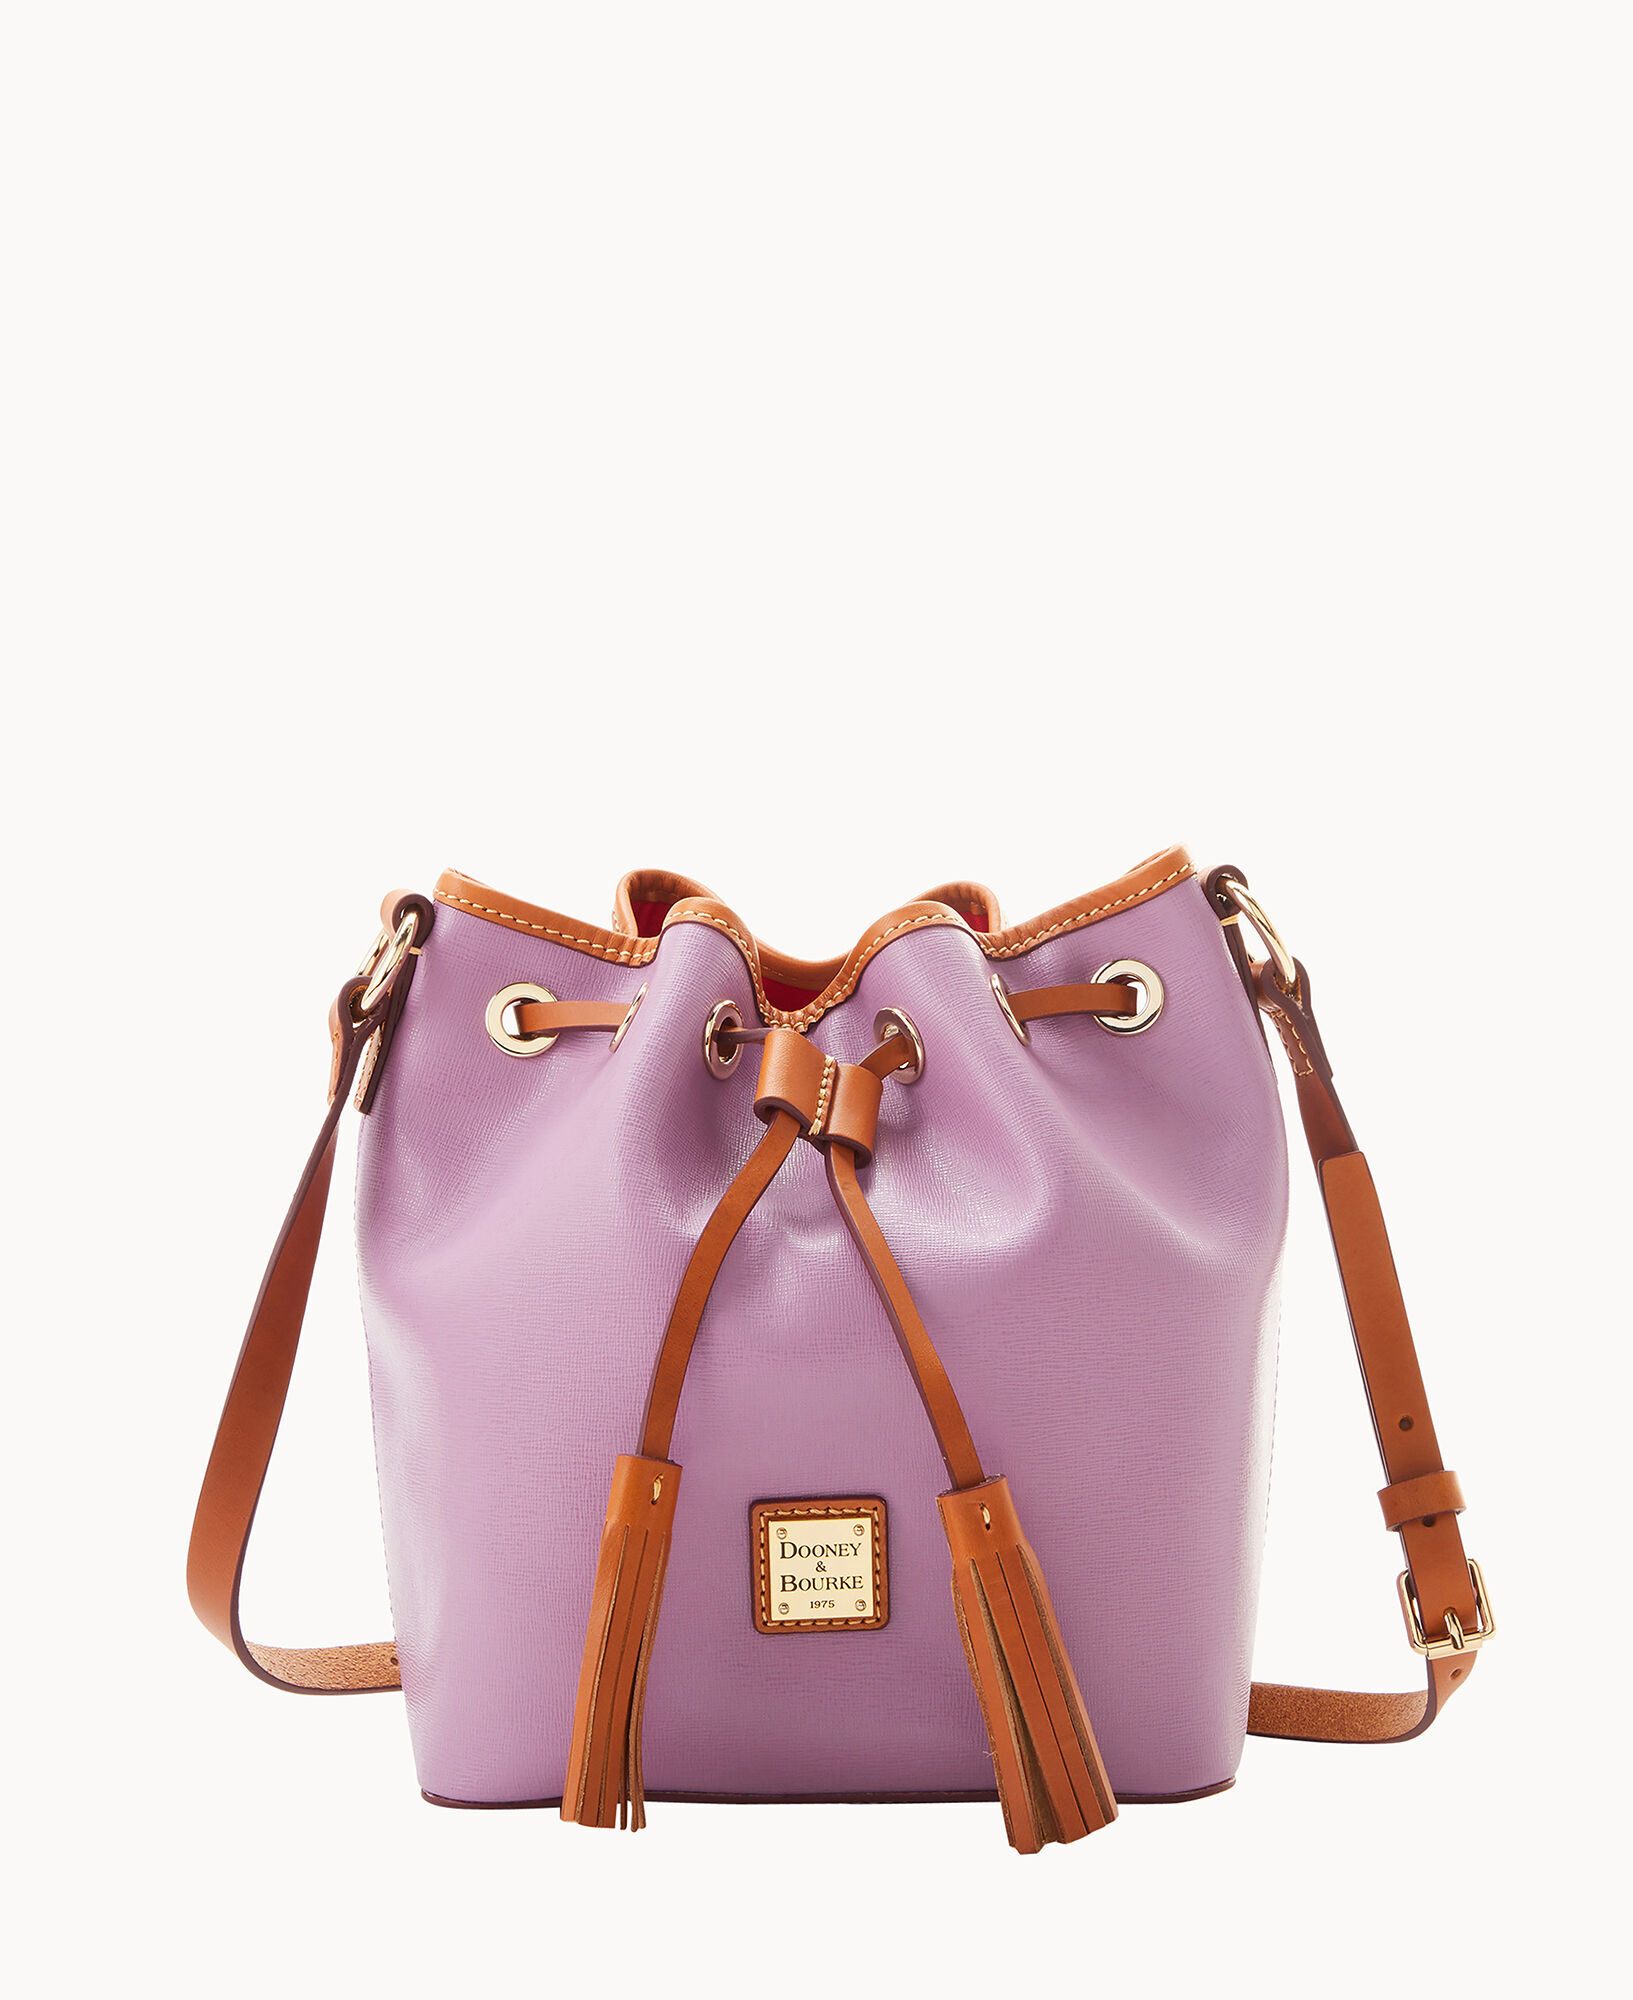 dooney and bourke saffiano leather